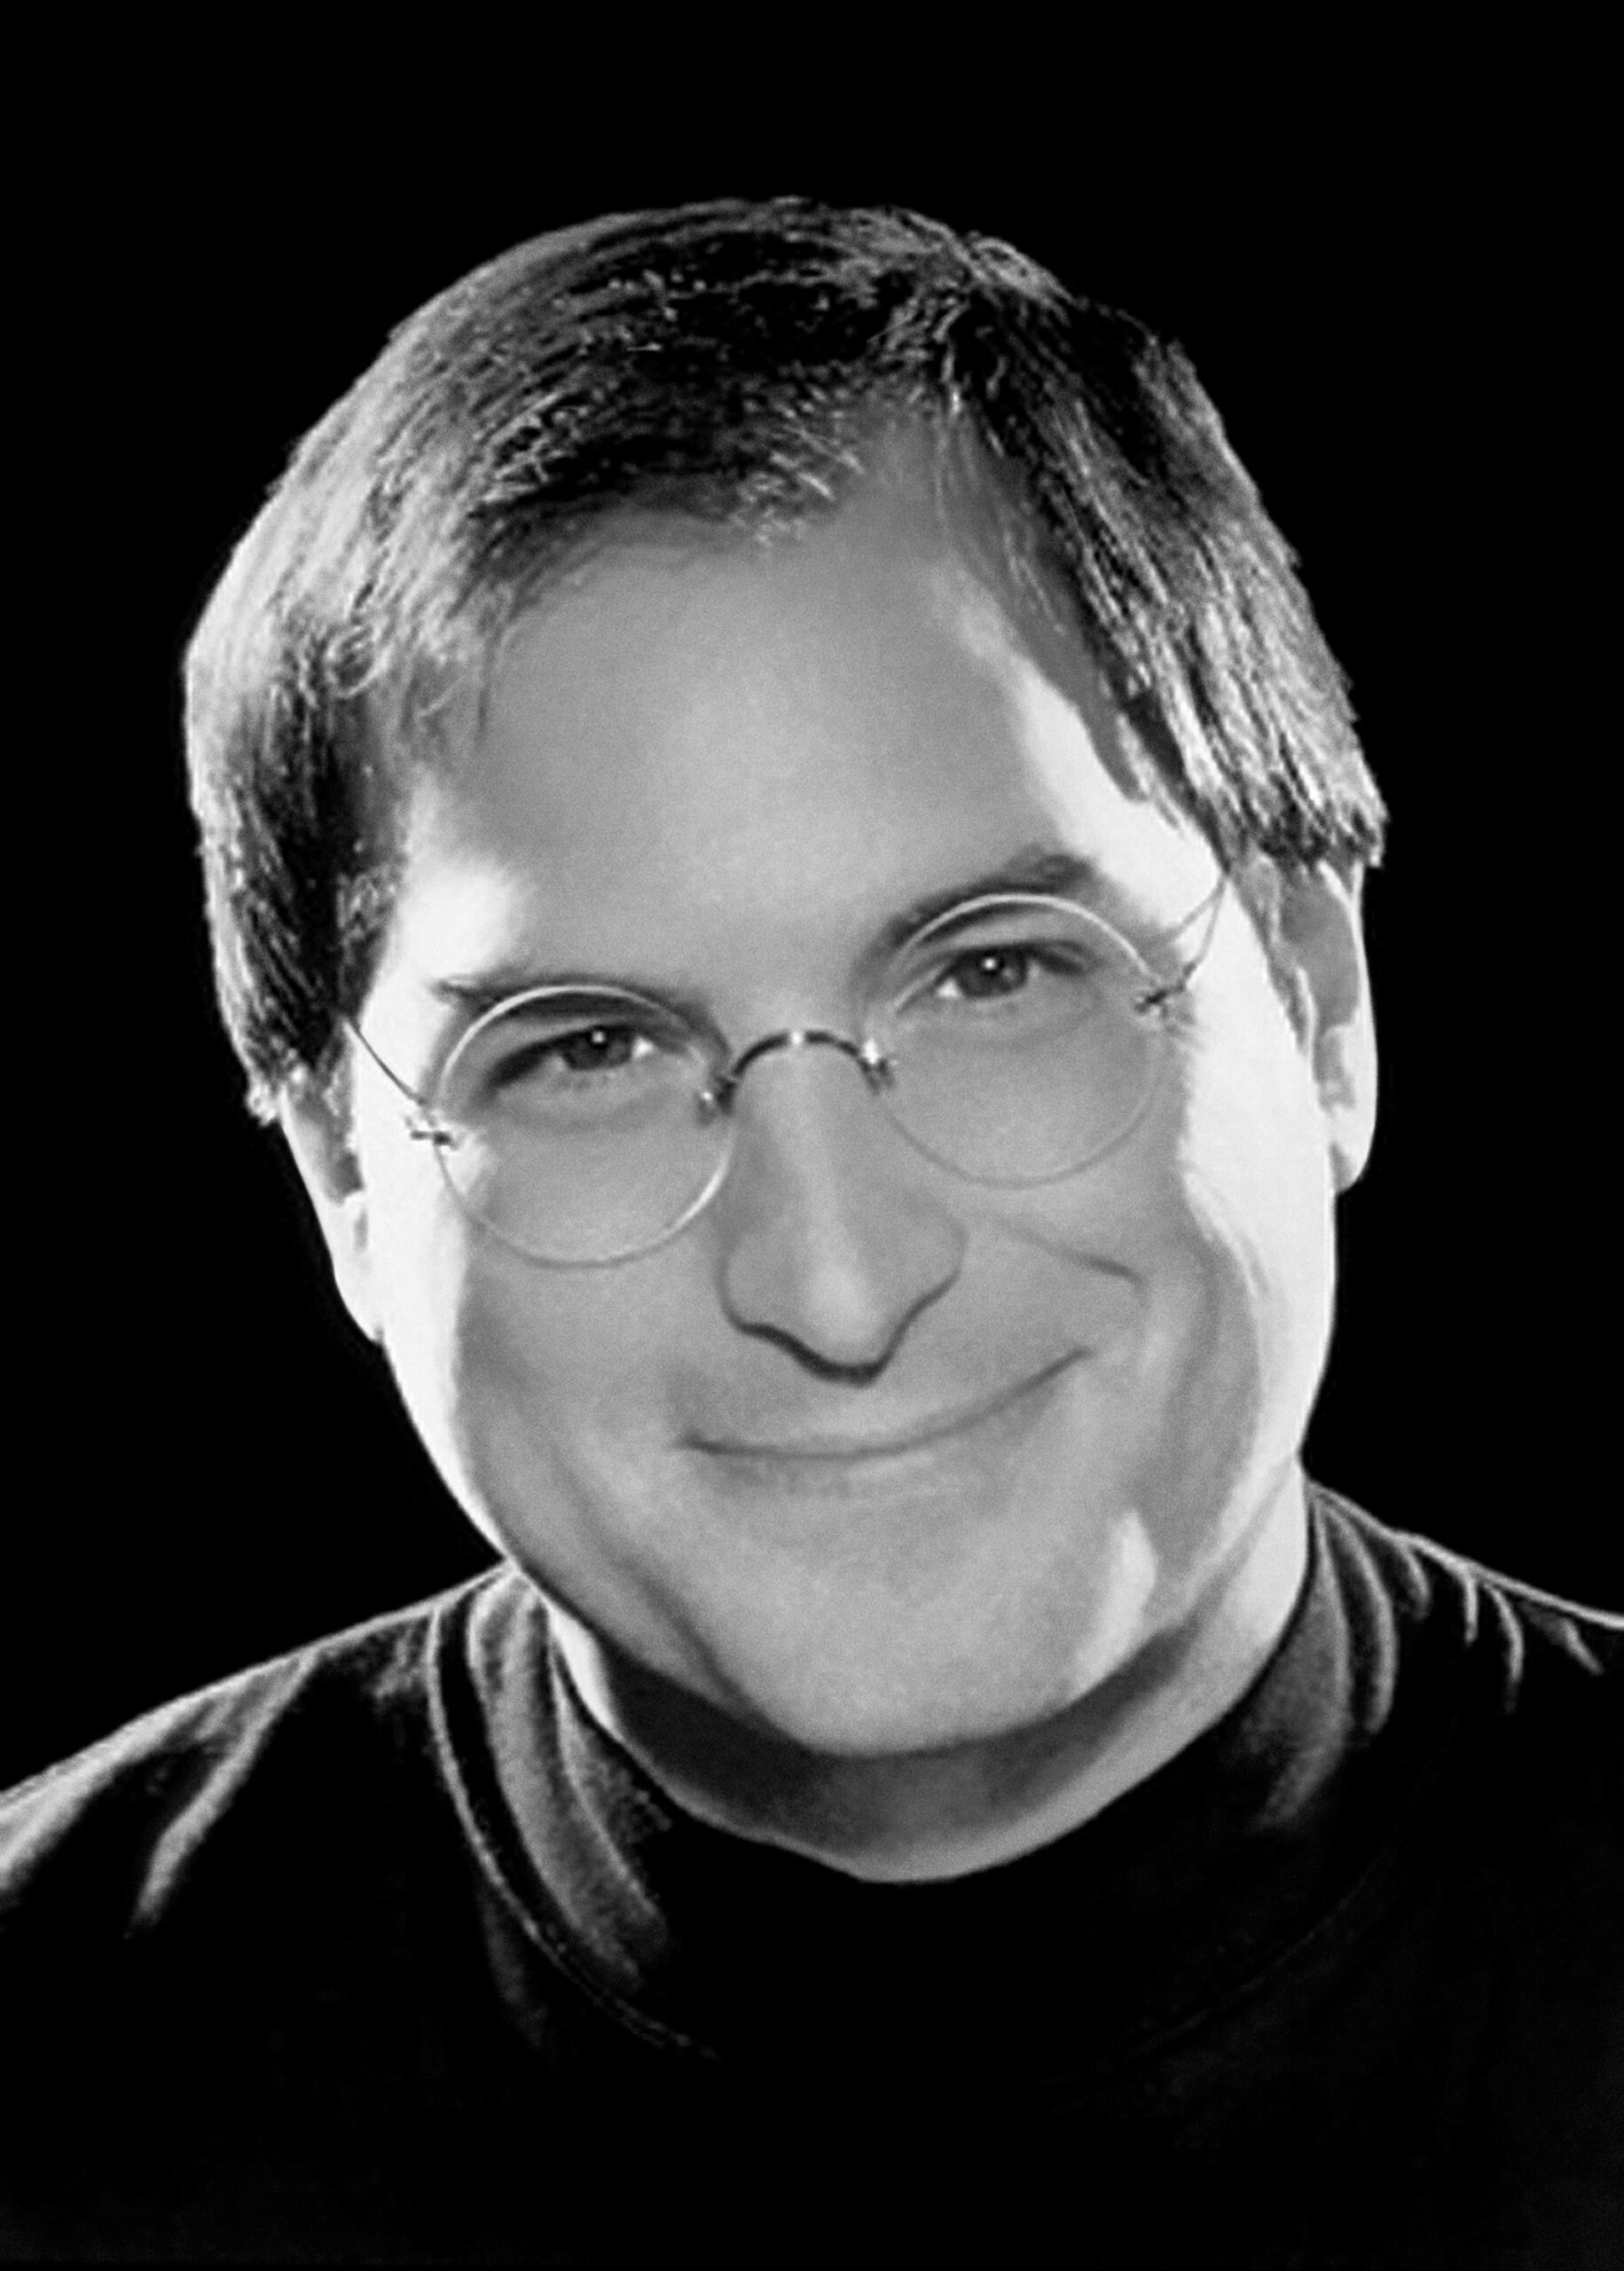 Headshot of a pleasant Steve Jobs wearing his signature turtle neck and round glasses.